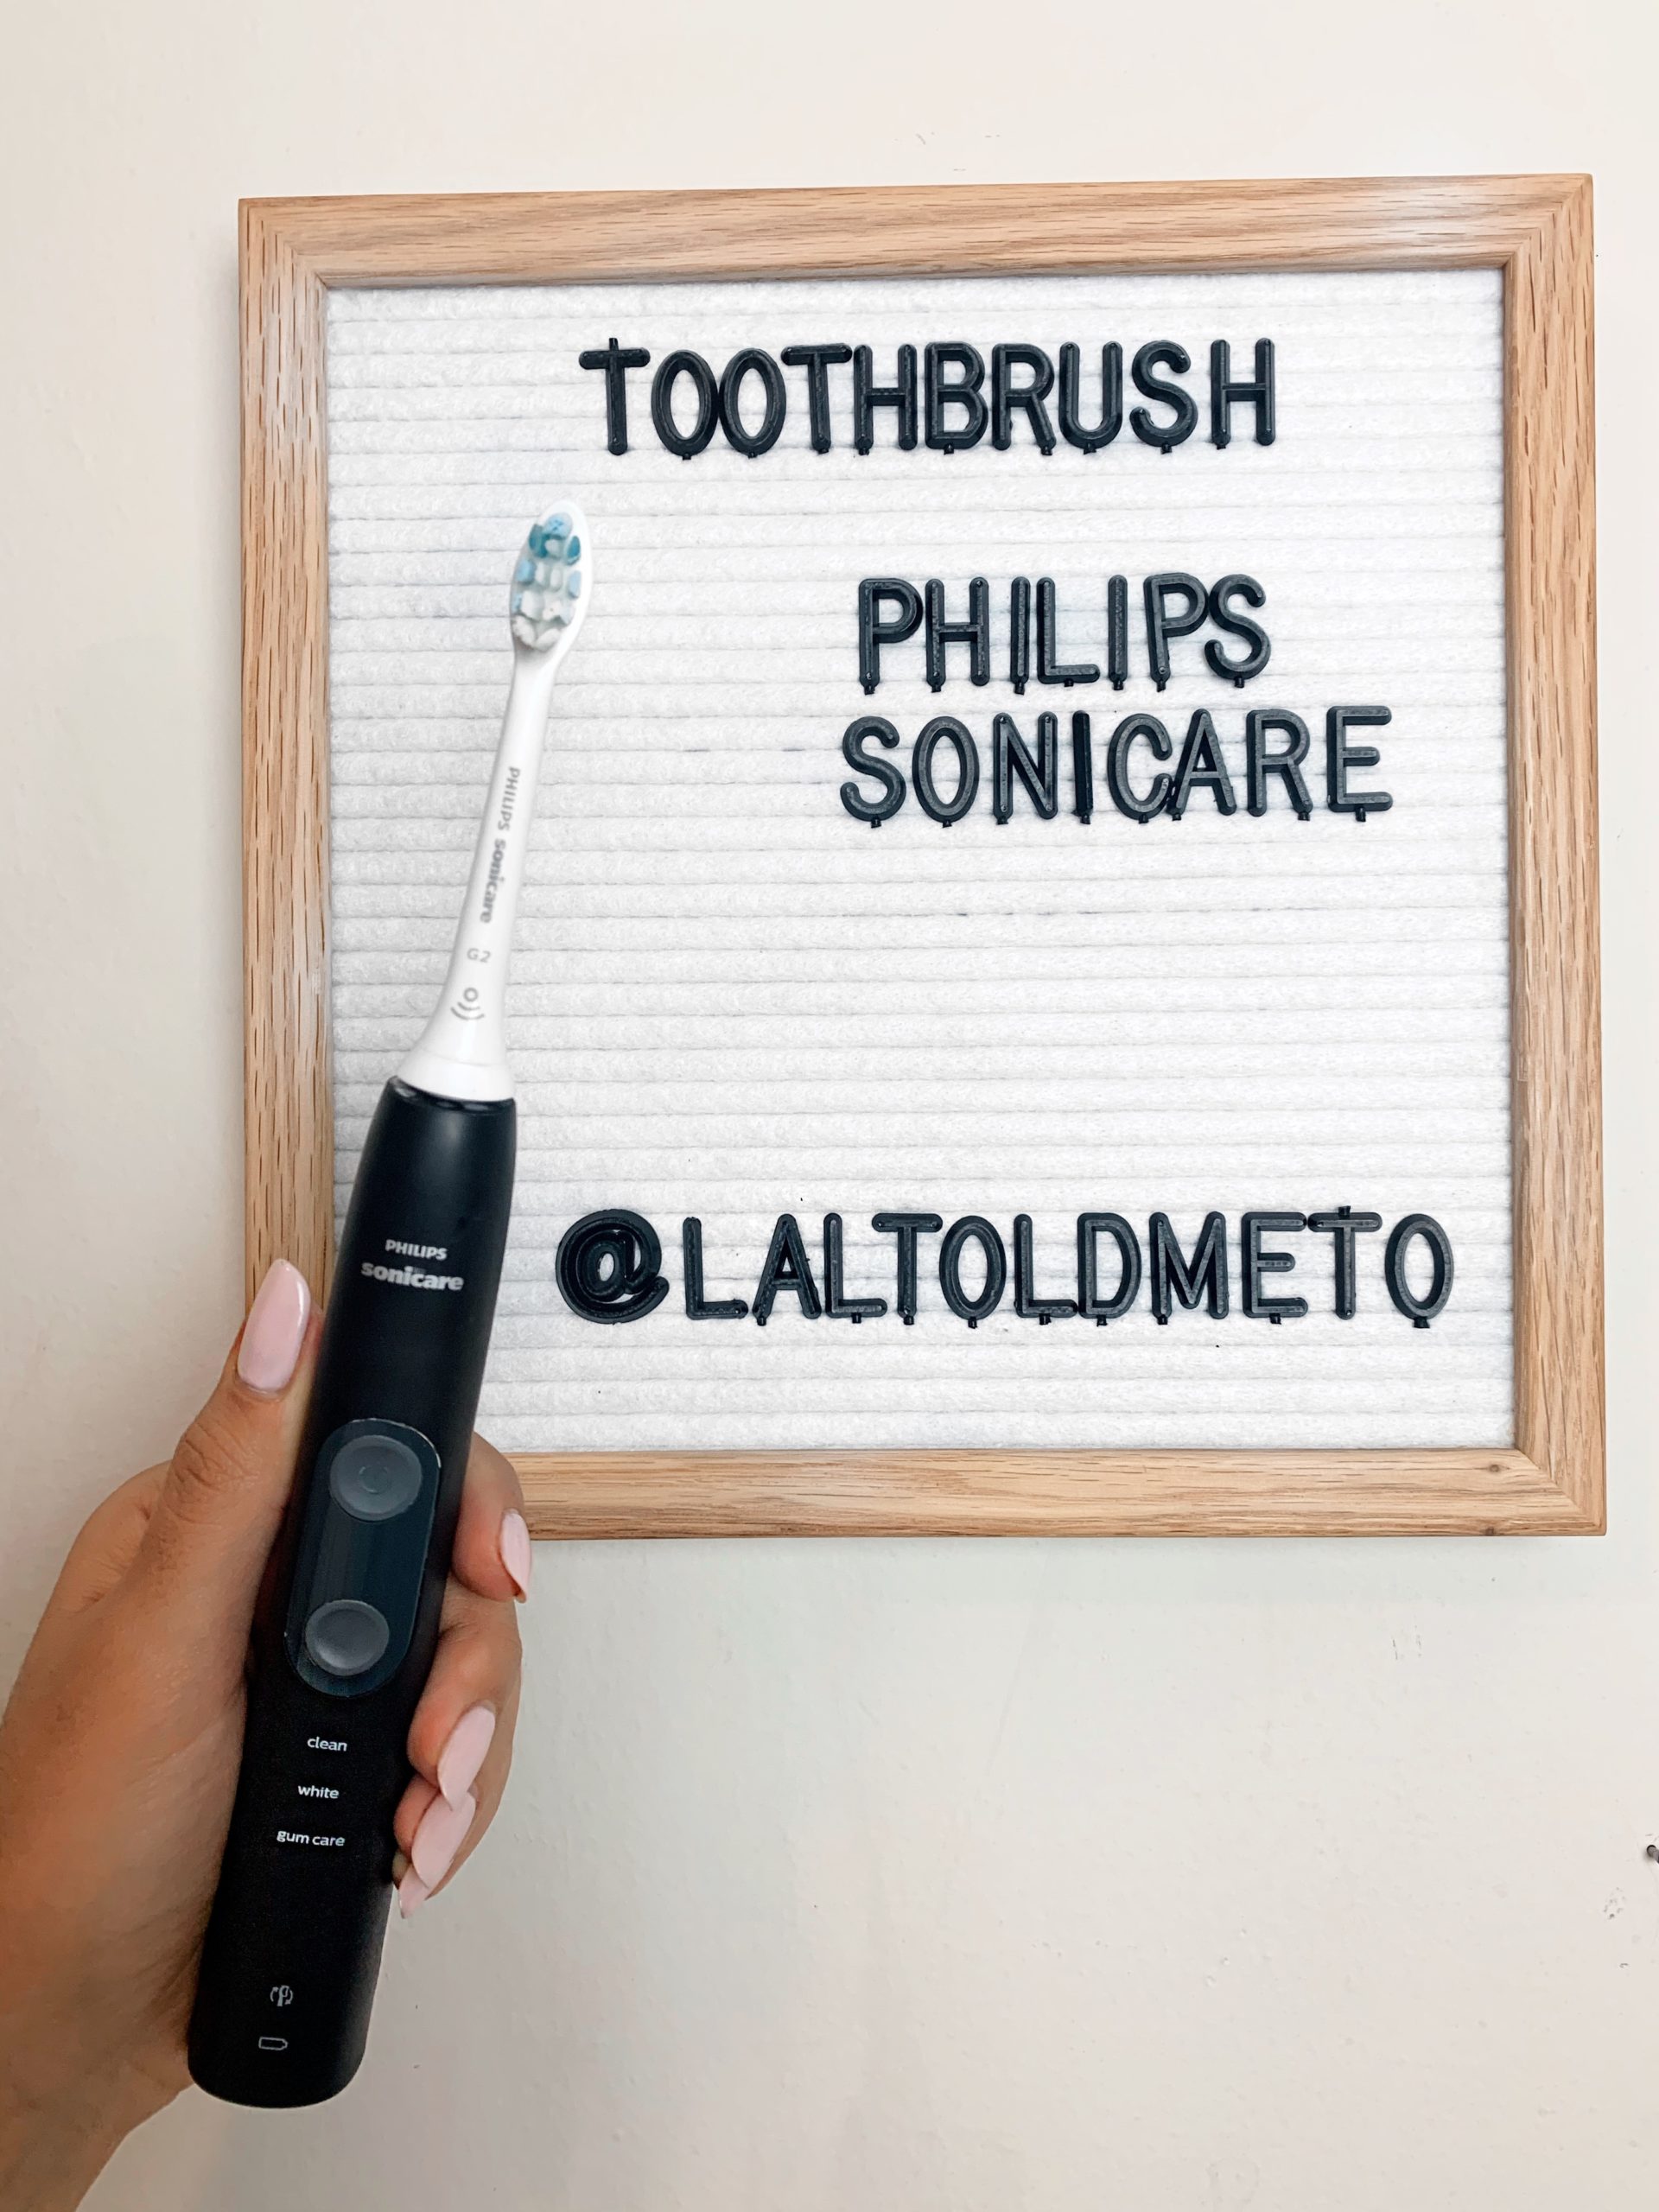 Phillips Sonicare Electronic Toothbrush